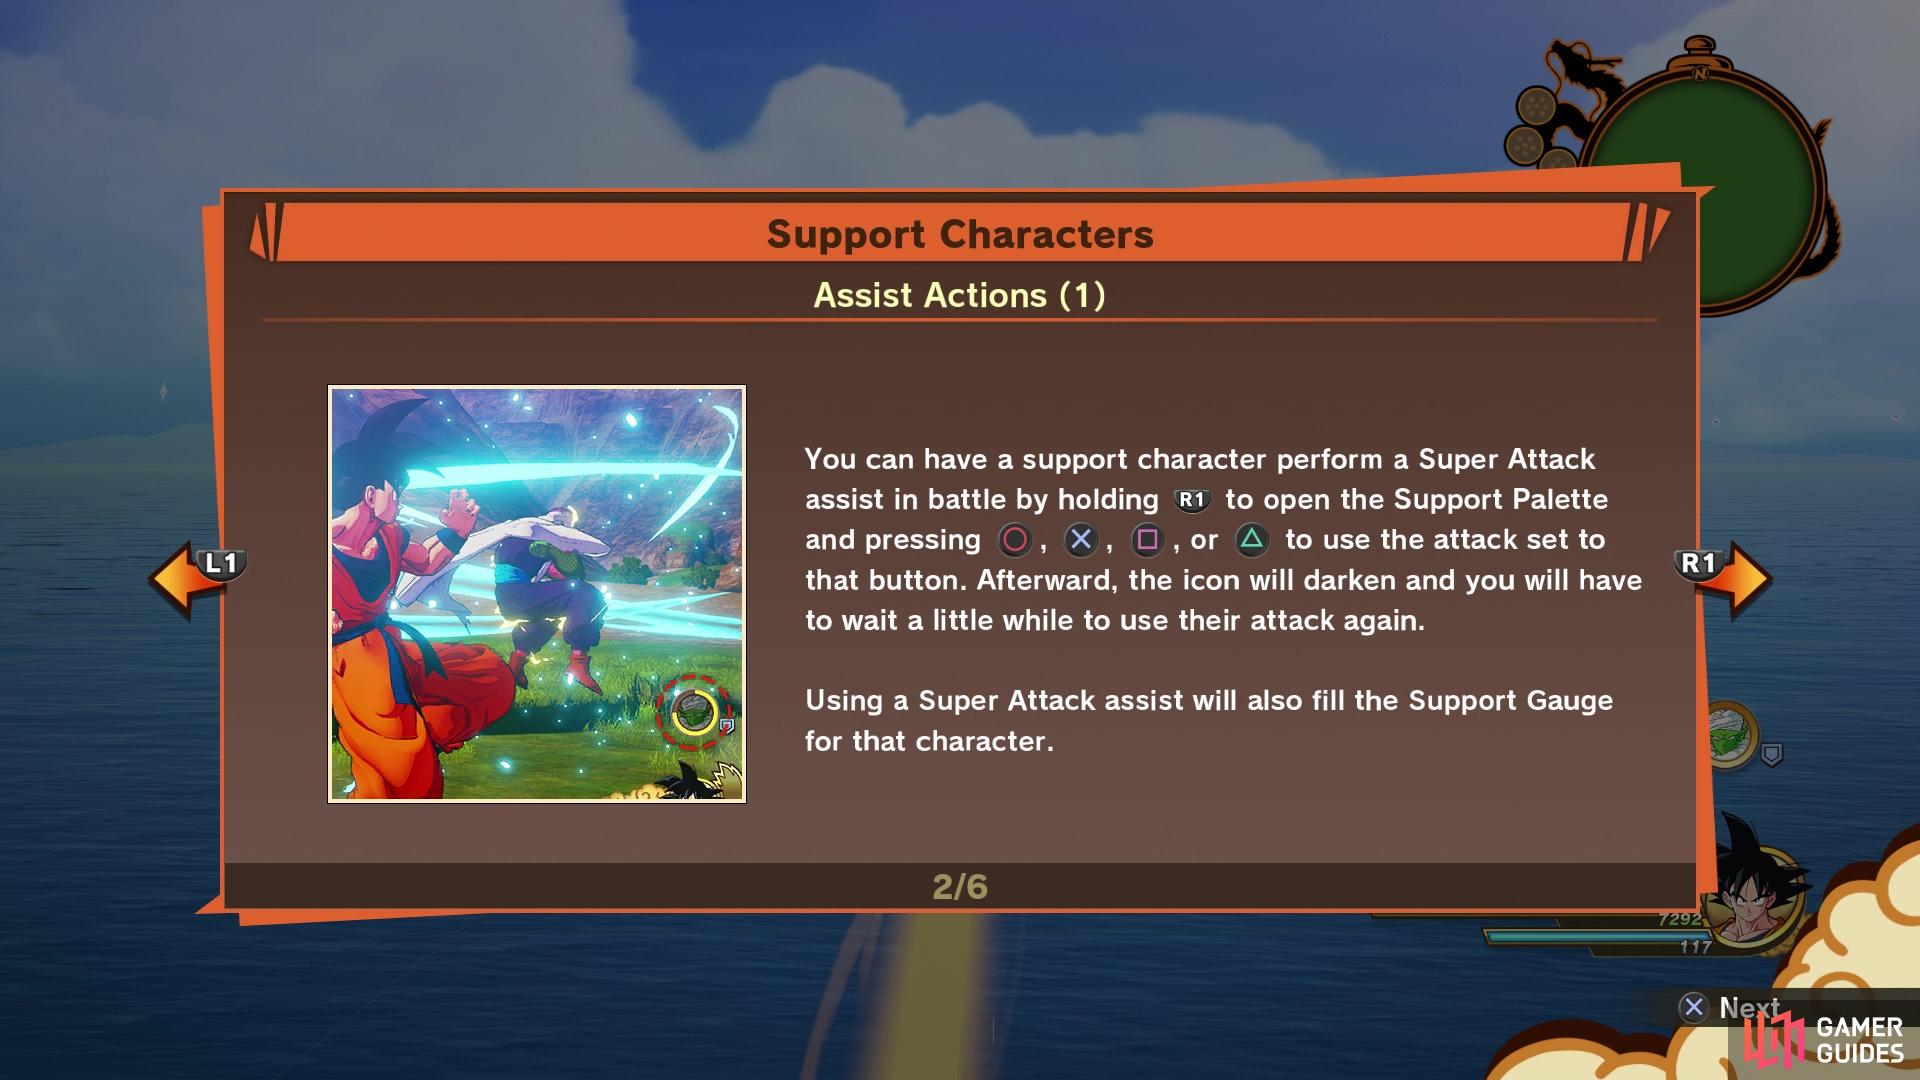 Having a support character will help in some of the tougher battles